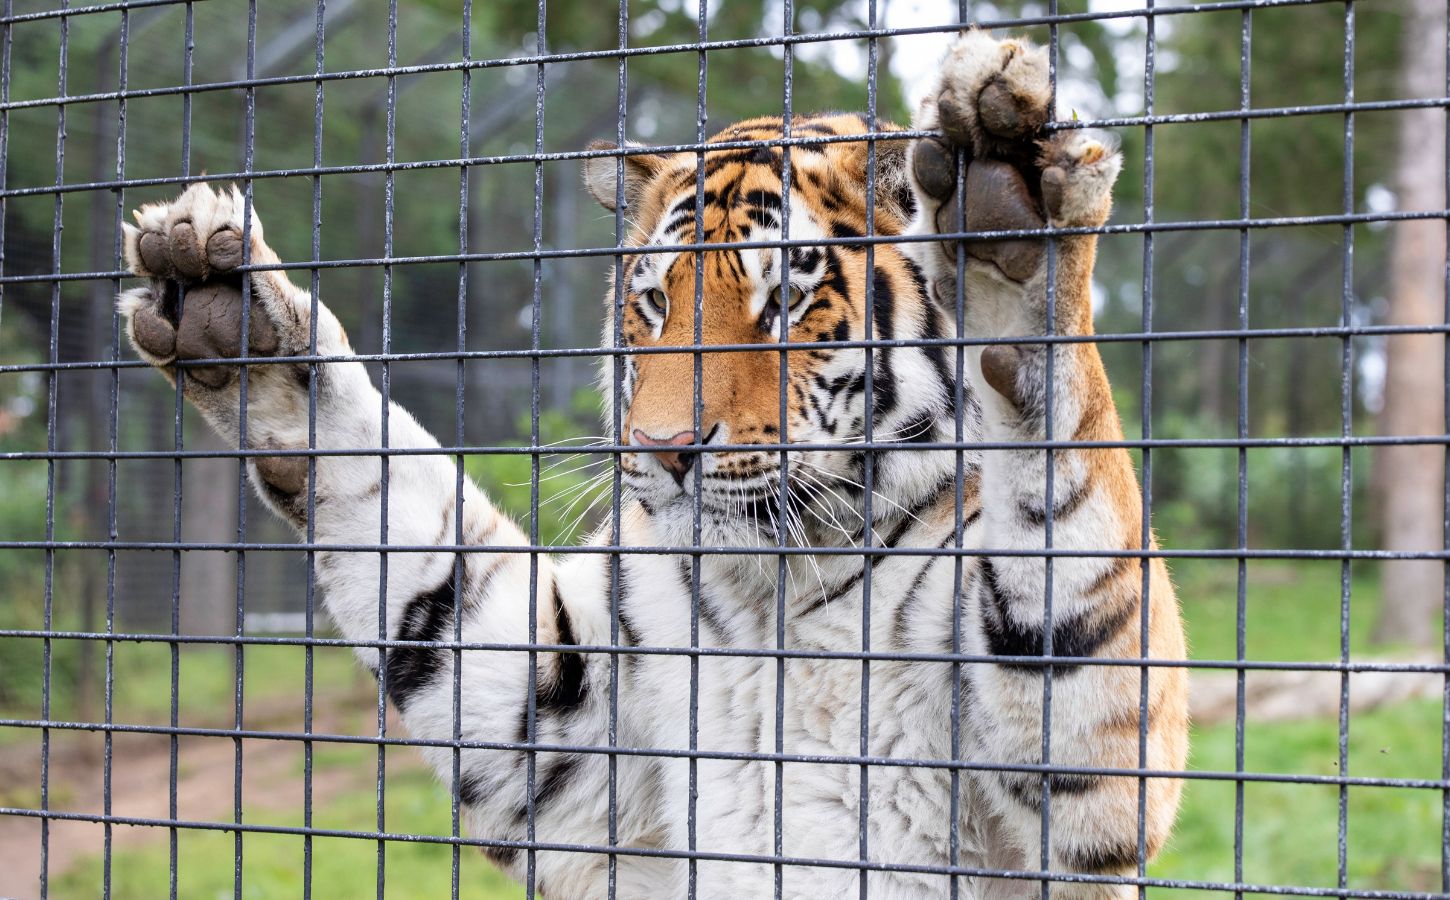 A tiger in captivity being kept at a UK zoo